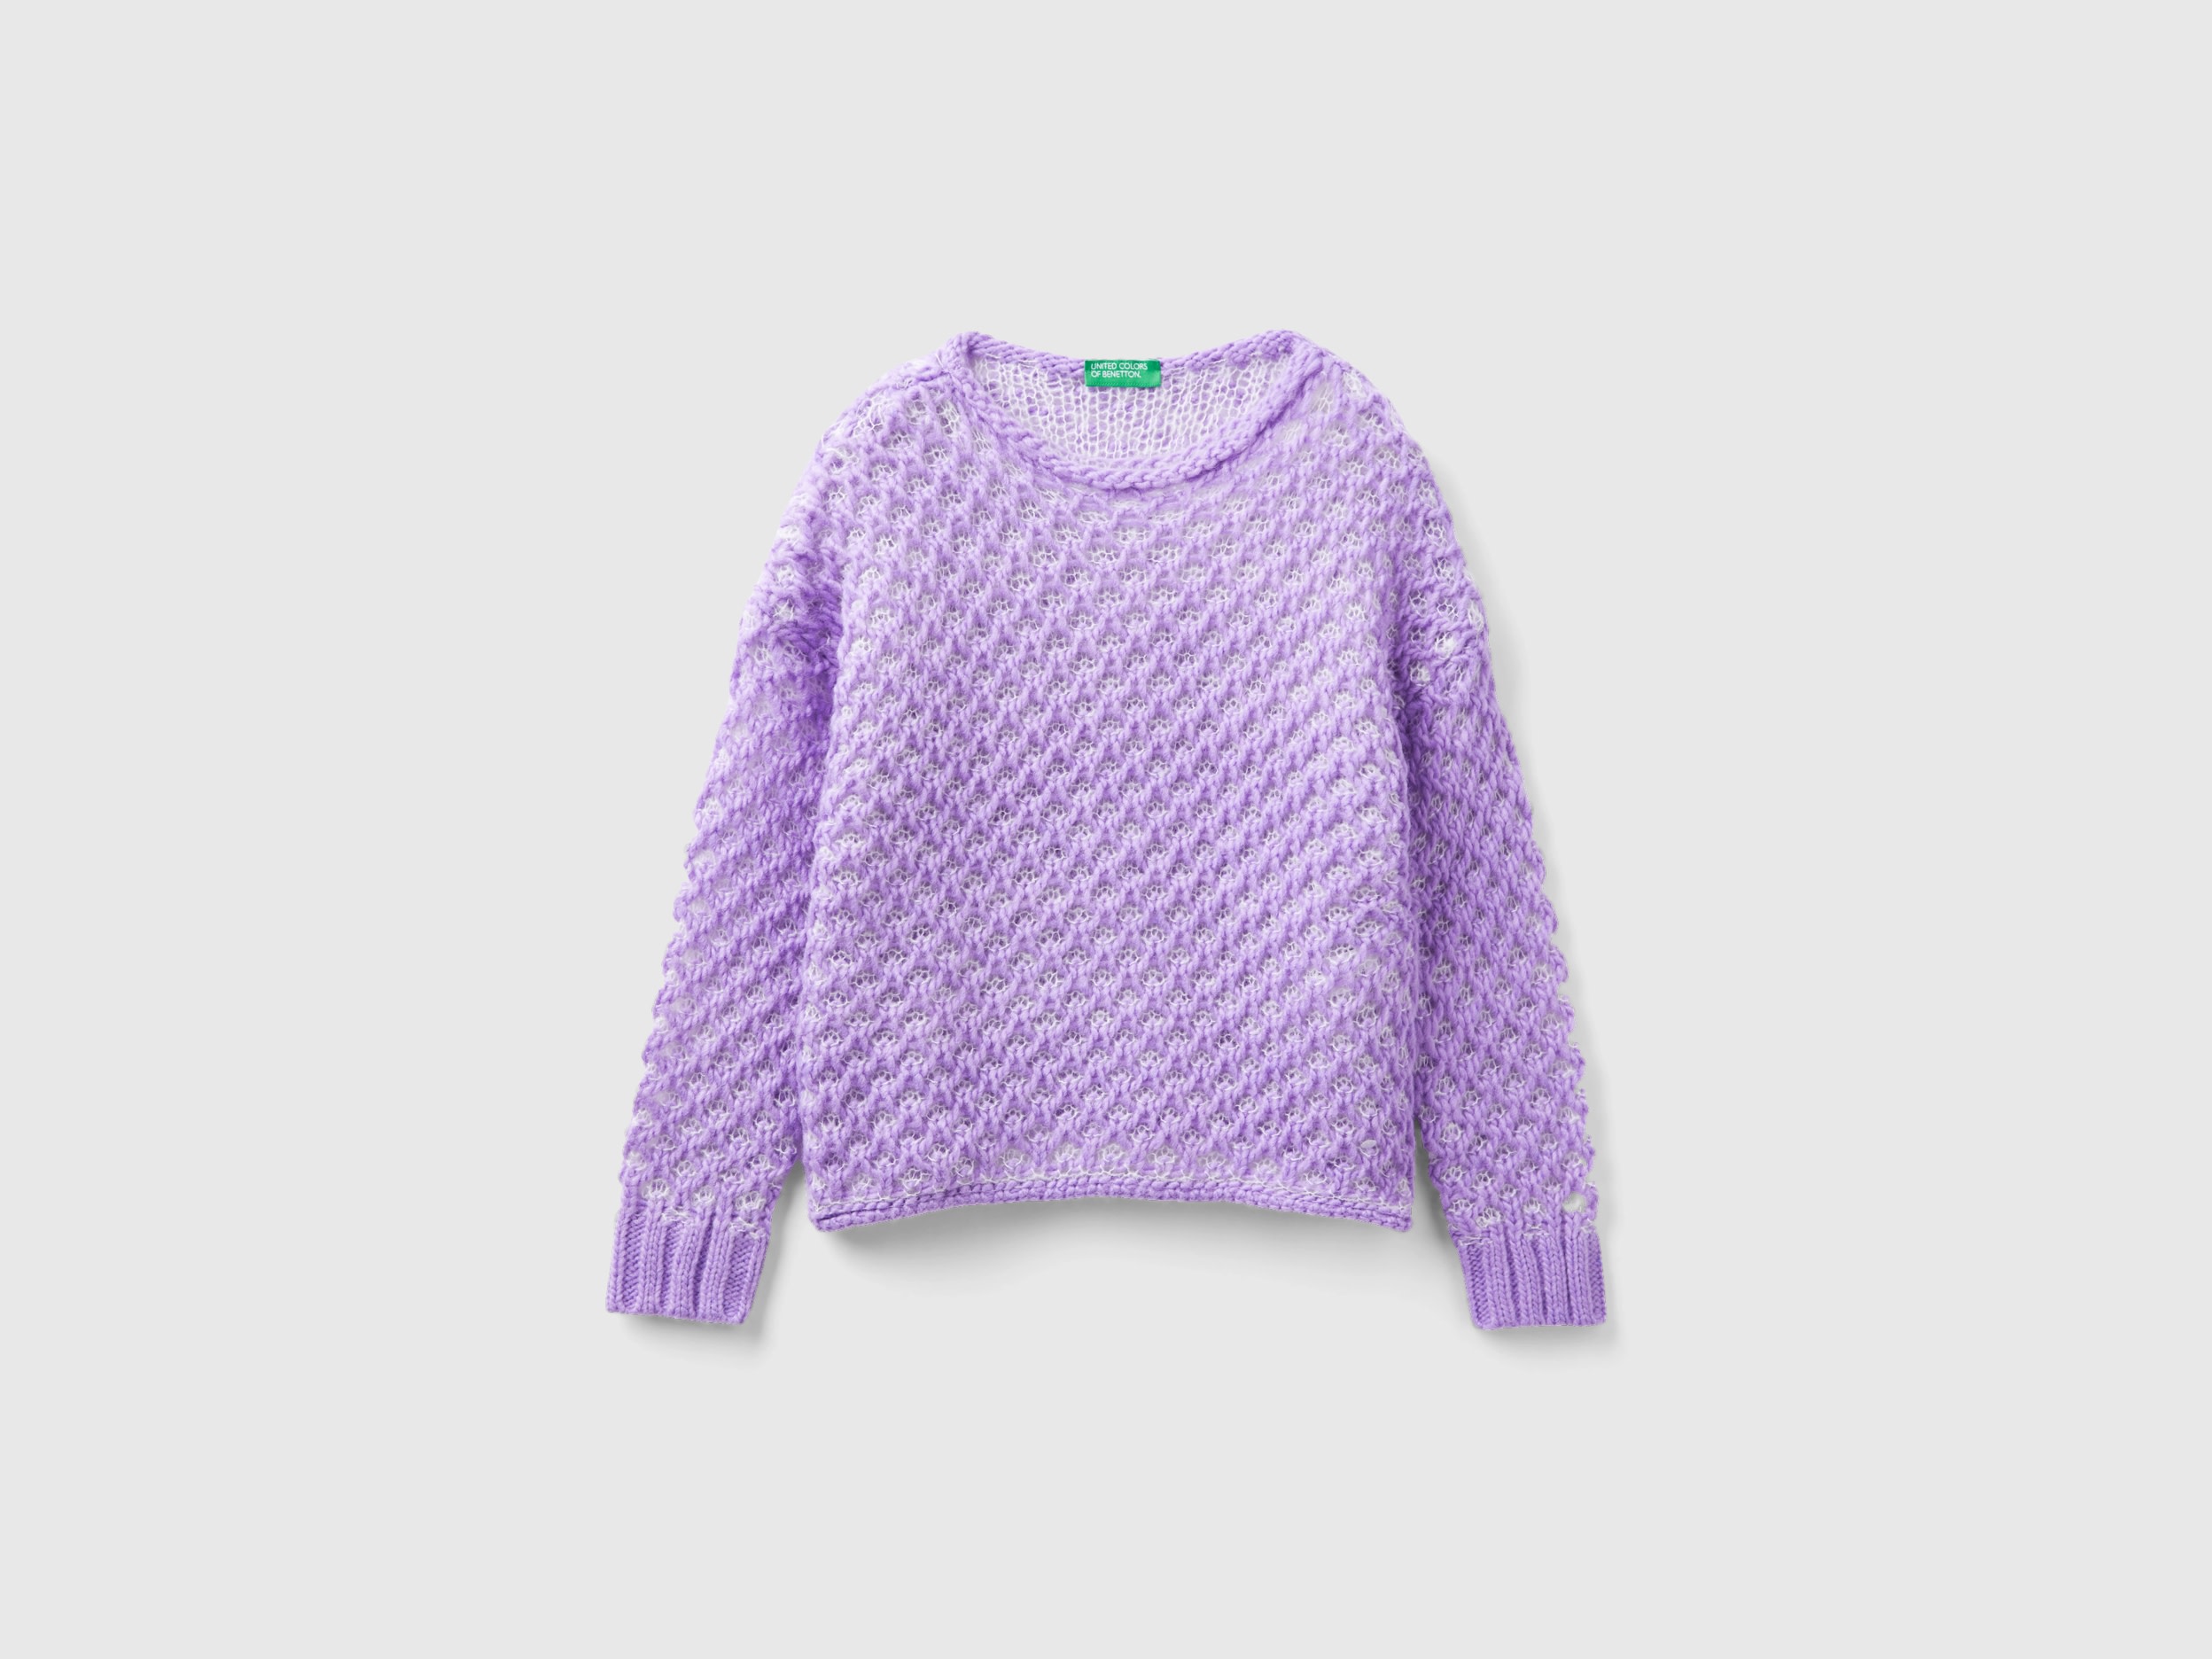 Benetton, Sweater With Jacquard Mesh, size L, Lilac, Kids